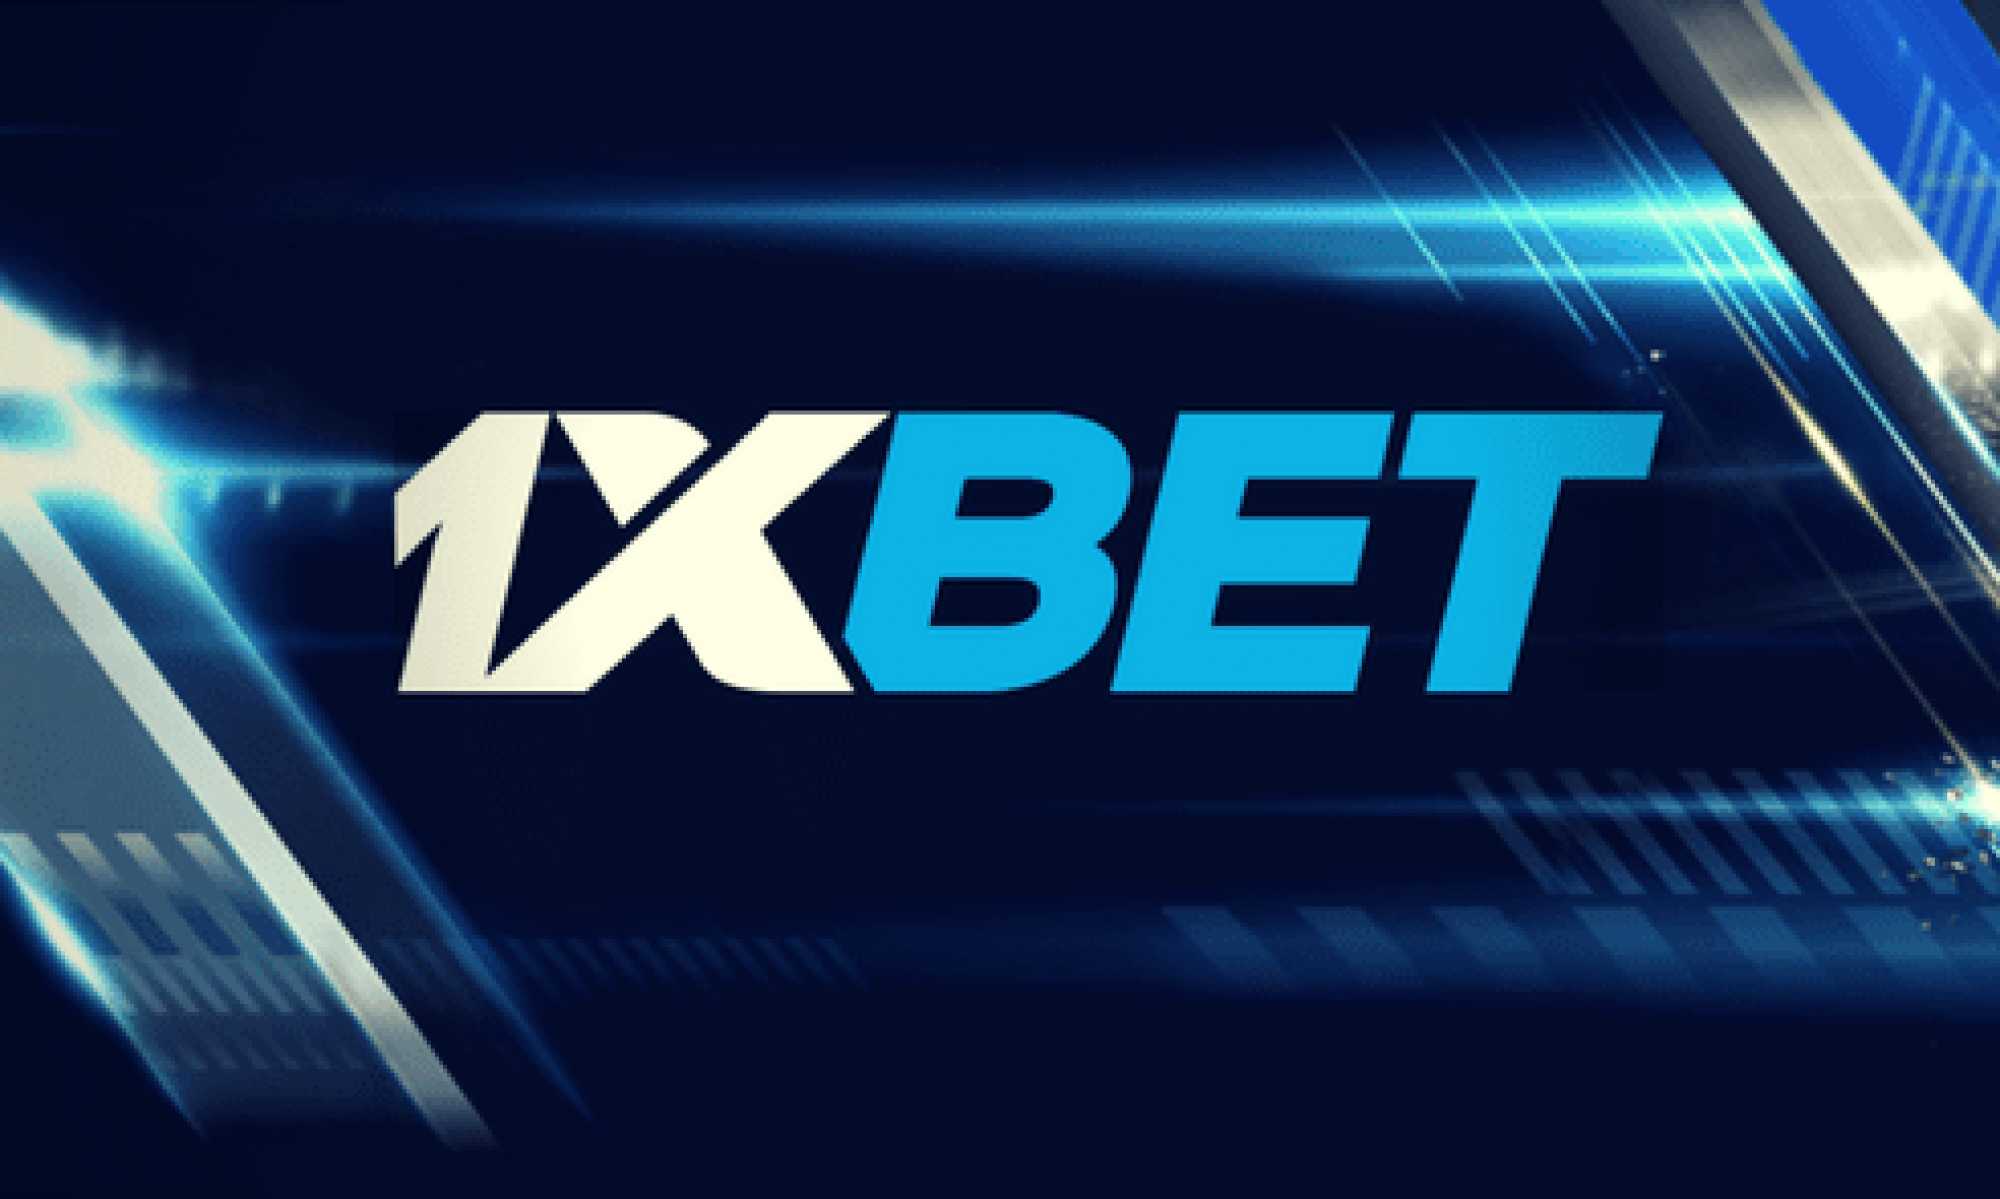 1xBet official site